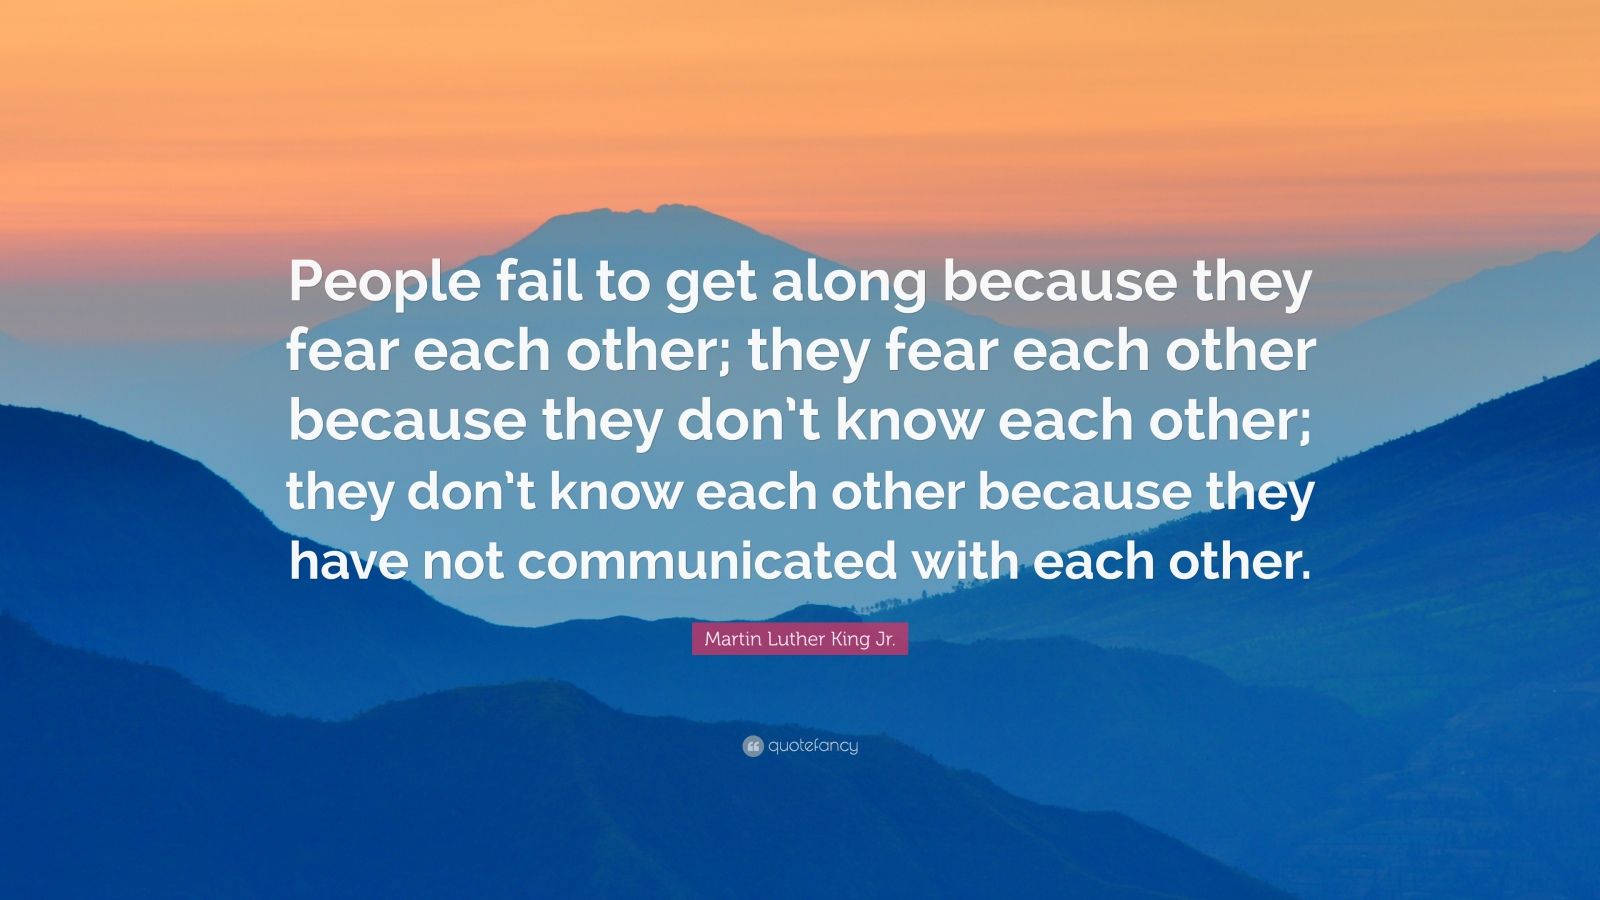 Martin Luther King Jr. Quote “People fail to get along